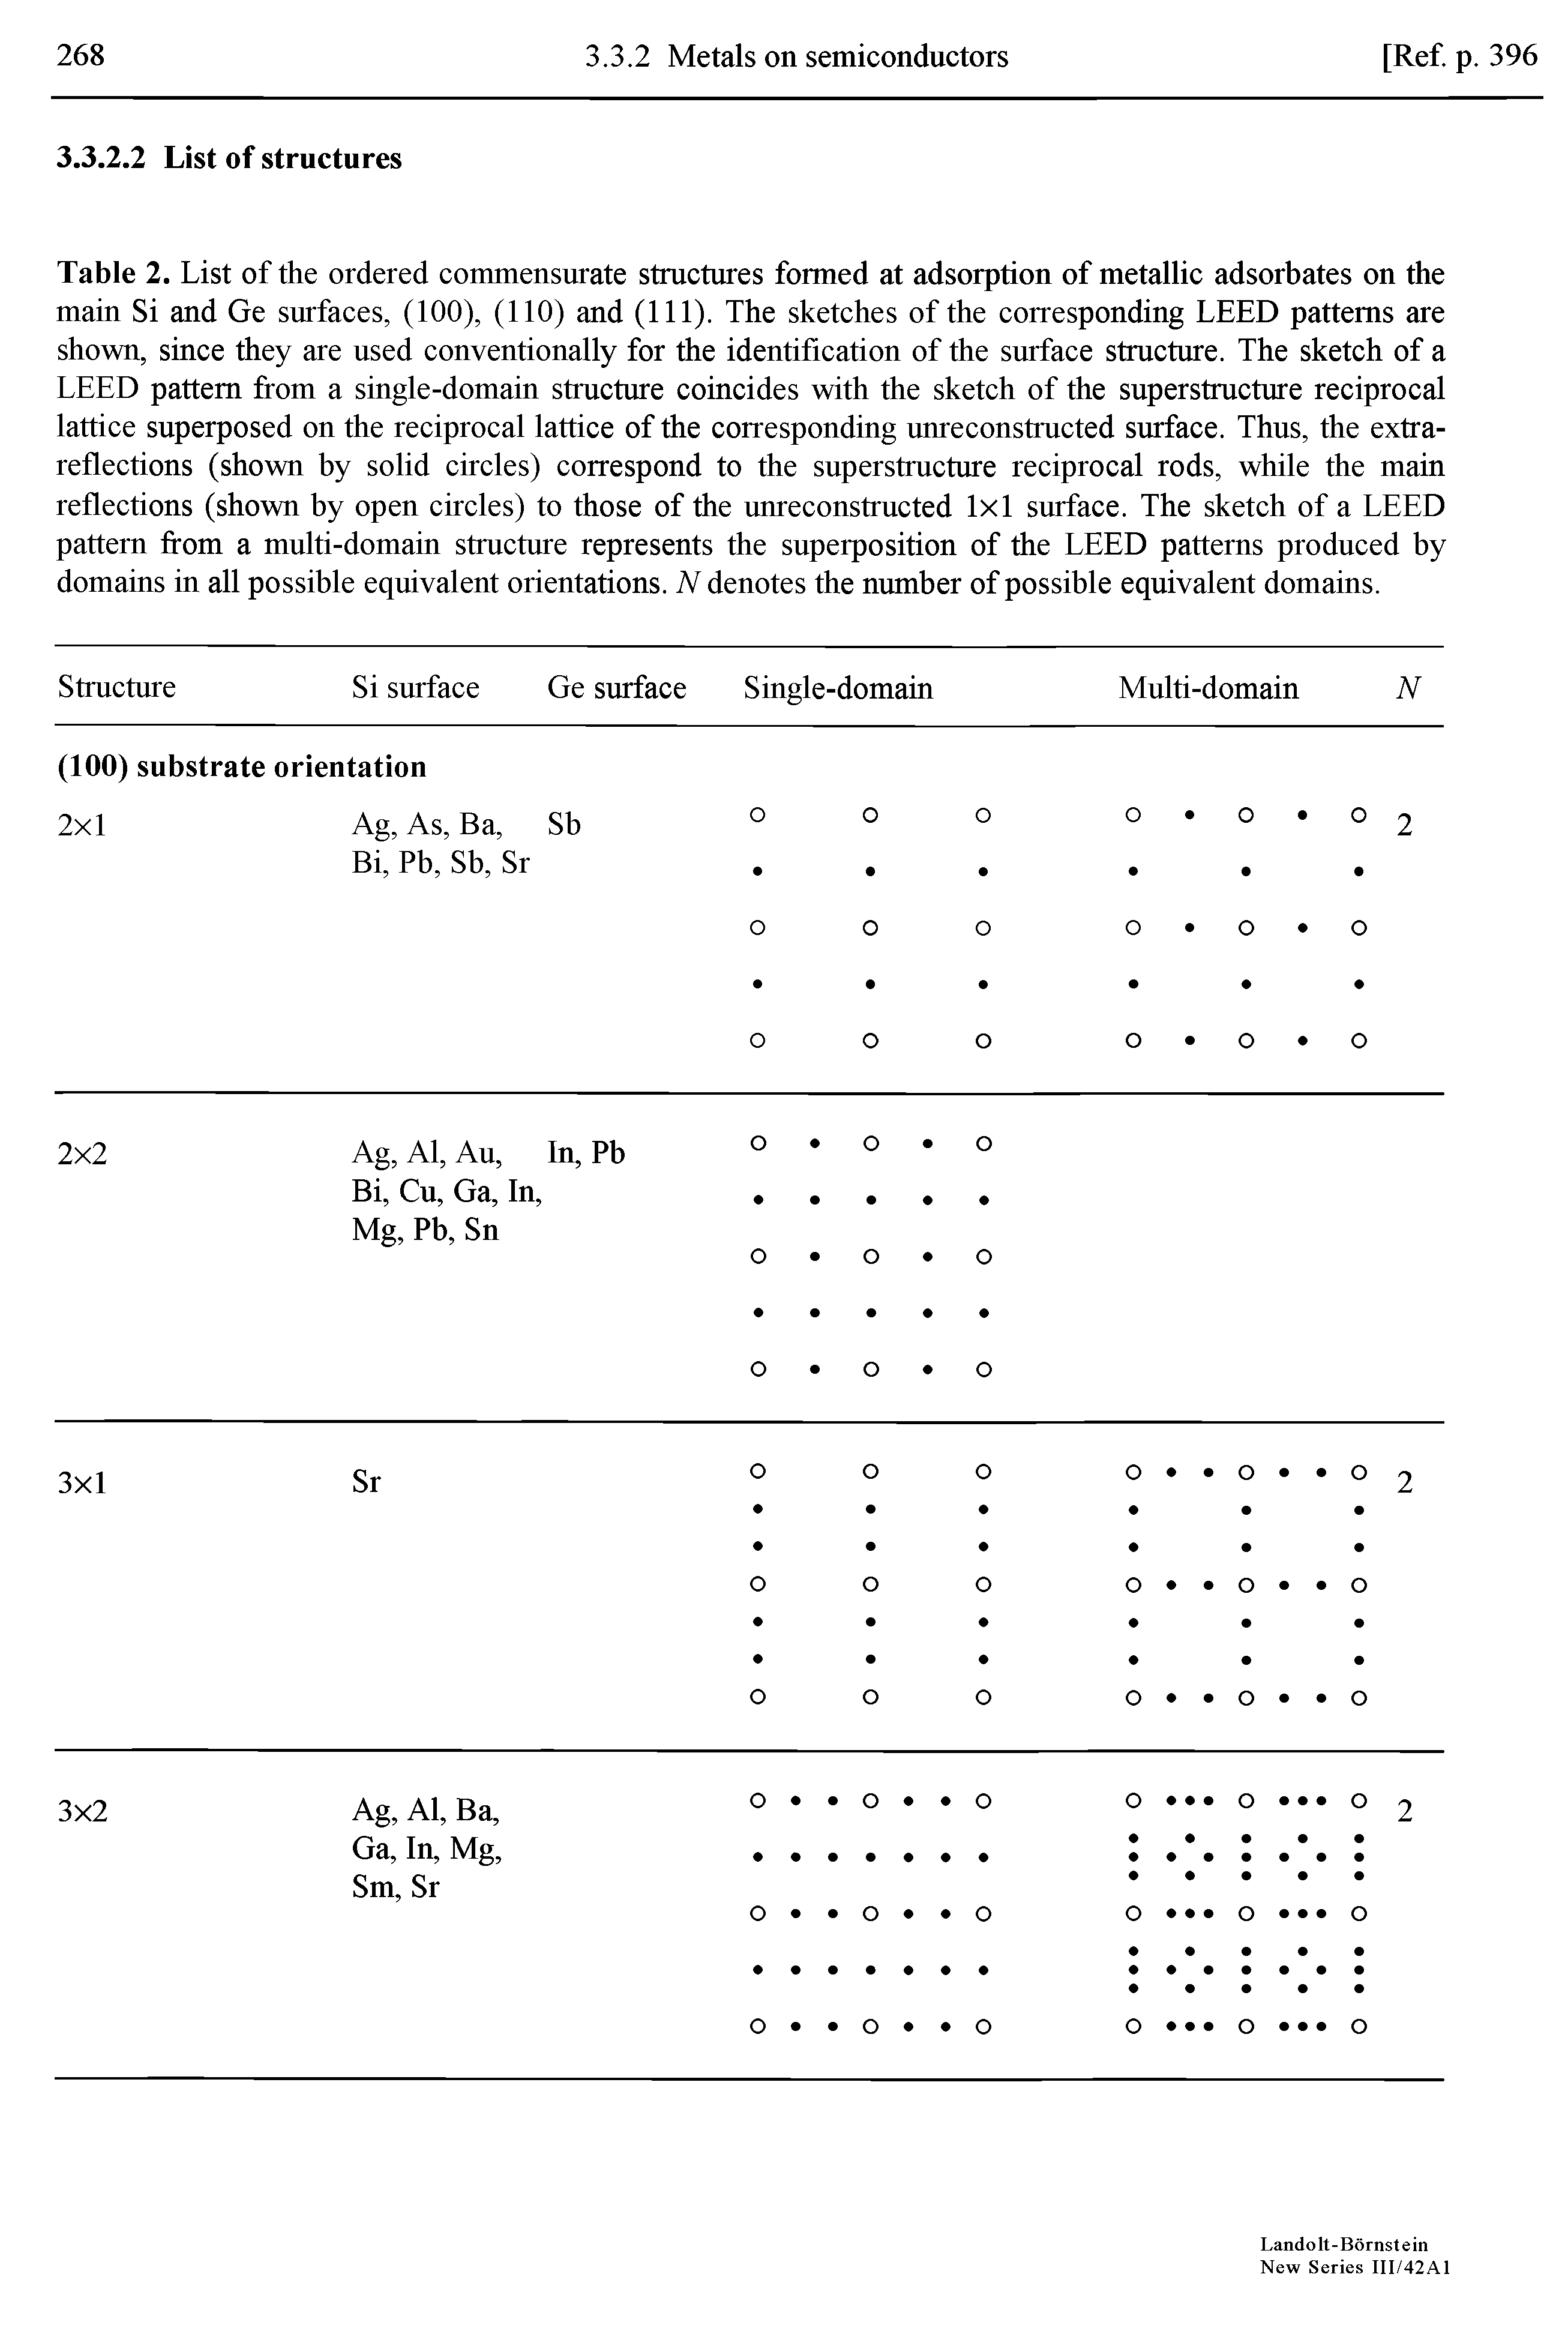 Table 2. List of the ordered commensurate structures formed at adsorption of metallic adsorbates on the main Si and Ge surfaces, (100), (110) and (111). The sketches of the corresponding LEED patterns are shown, since they are used conventionally for the identification of the surface structure. The sketch of a LEED pattern from a single-domain structure coincides with the sketch of the superstructure reciprocal lattice superposed on the reciprocal lattice of the corresponding unreconstructed surface. Thus, the extrareflections (shown by solid circles) correspond to the superstructure reciprocal rods, while the main reflections (shown by open circles) to those of the unreconstructed 1x1 surface. The sketch of a LEED pattern from a multi-domain structure represents the superposition of the LEED patterns produced by domains in all possible equivalent orientations. N denotes the number of possible equivalent domains.